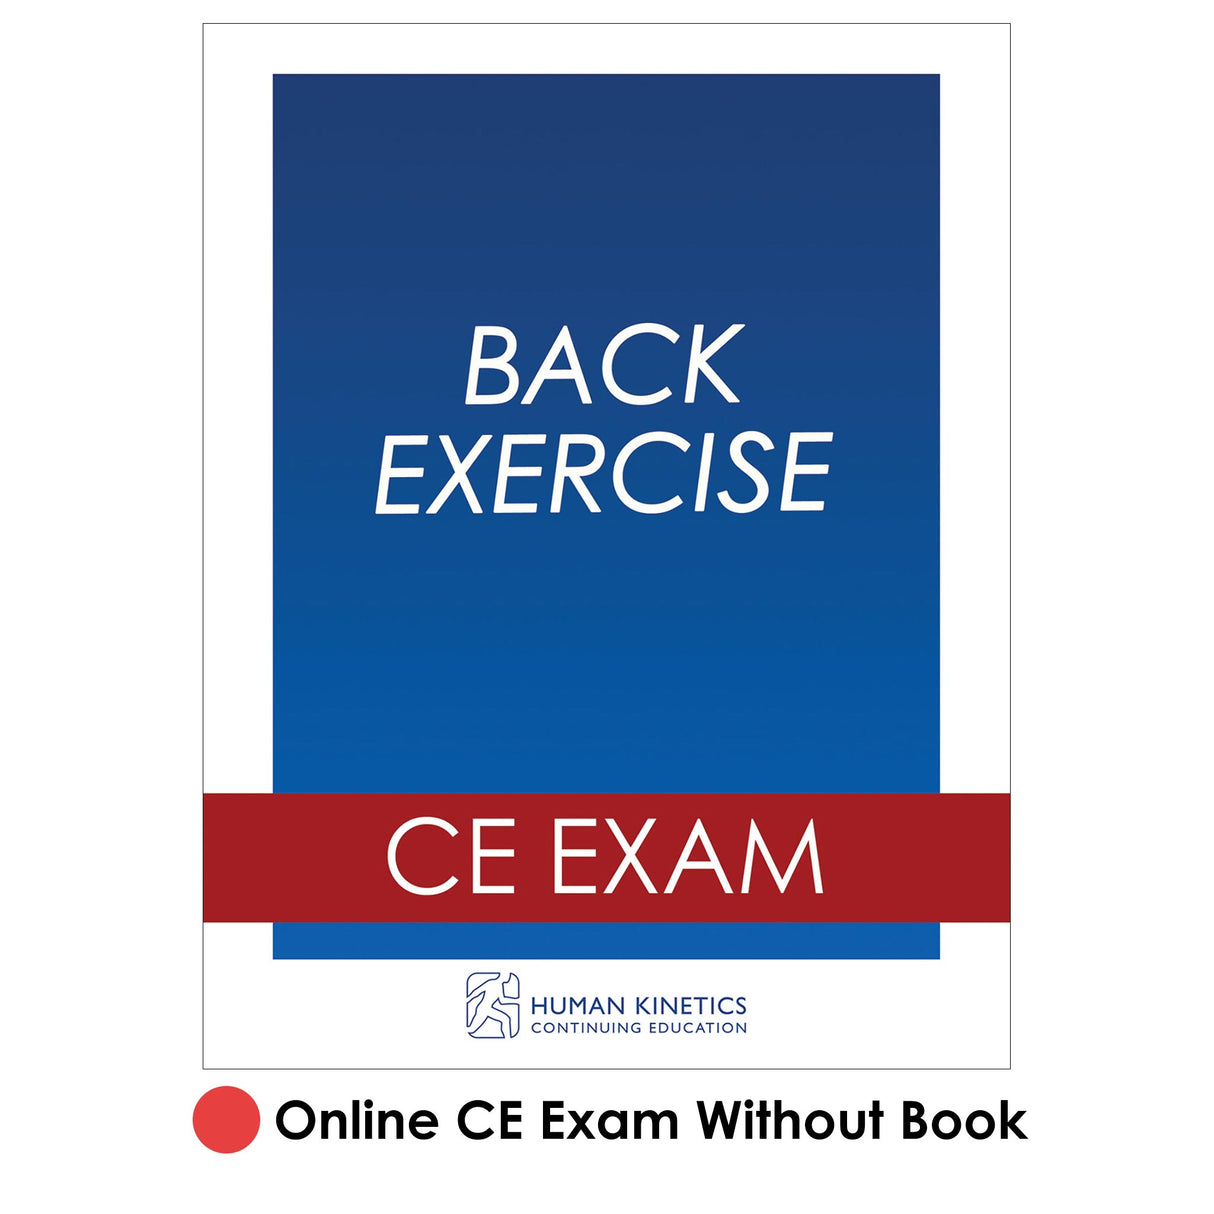 Back Exercise Online CE Exam Without Book